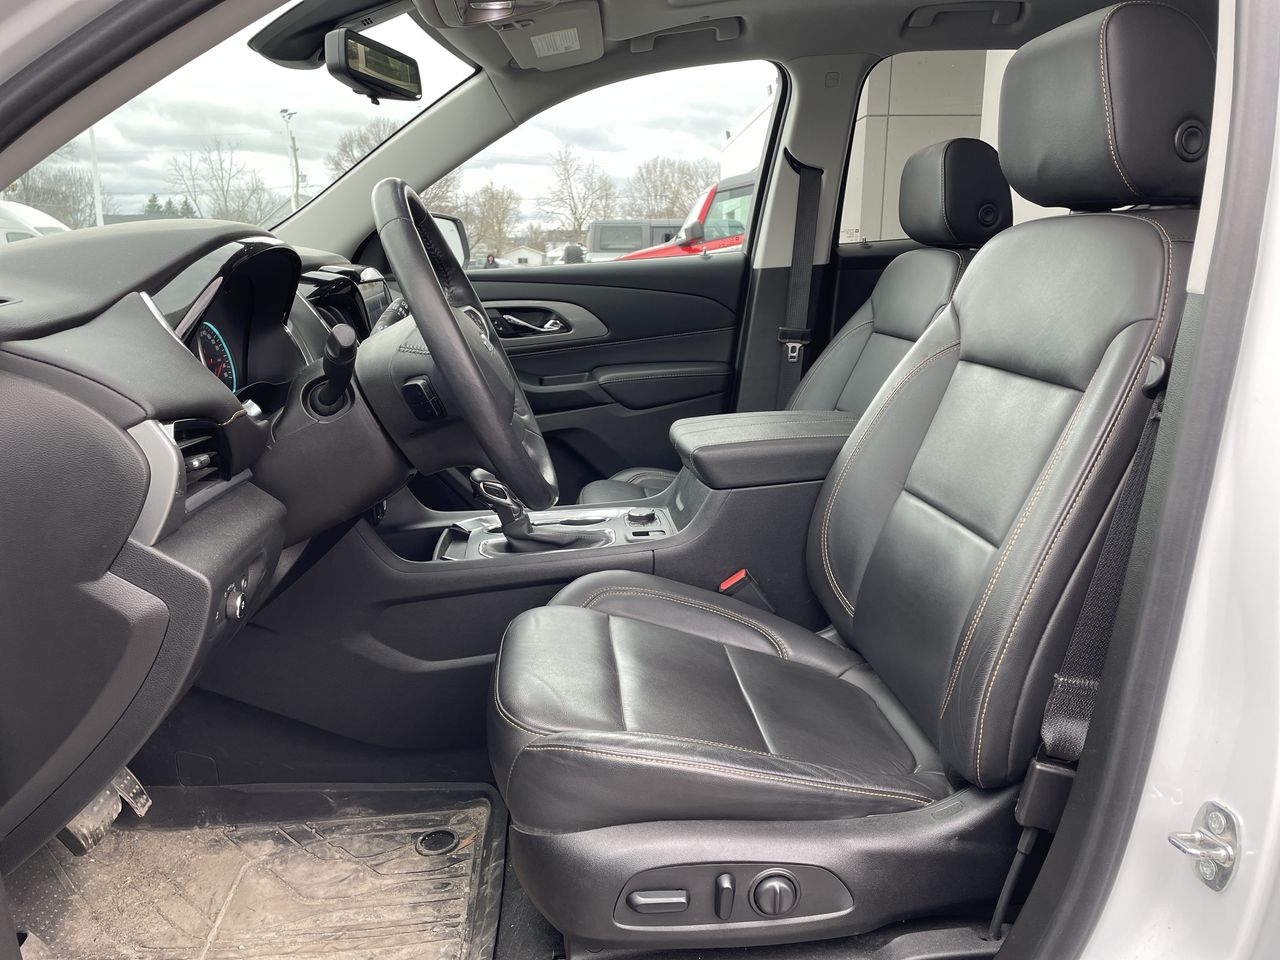 2021 Chevrolet Traverse - 21525A Full Image 3